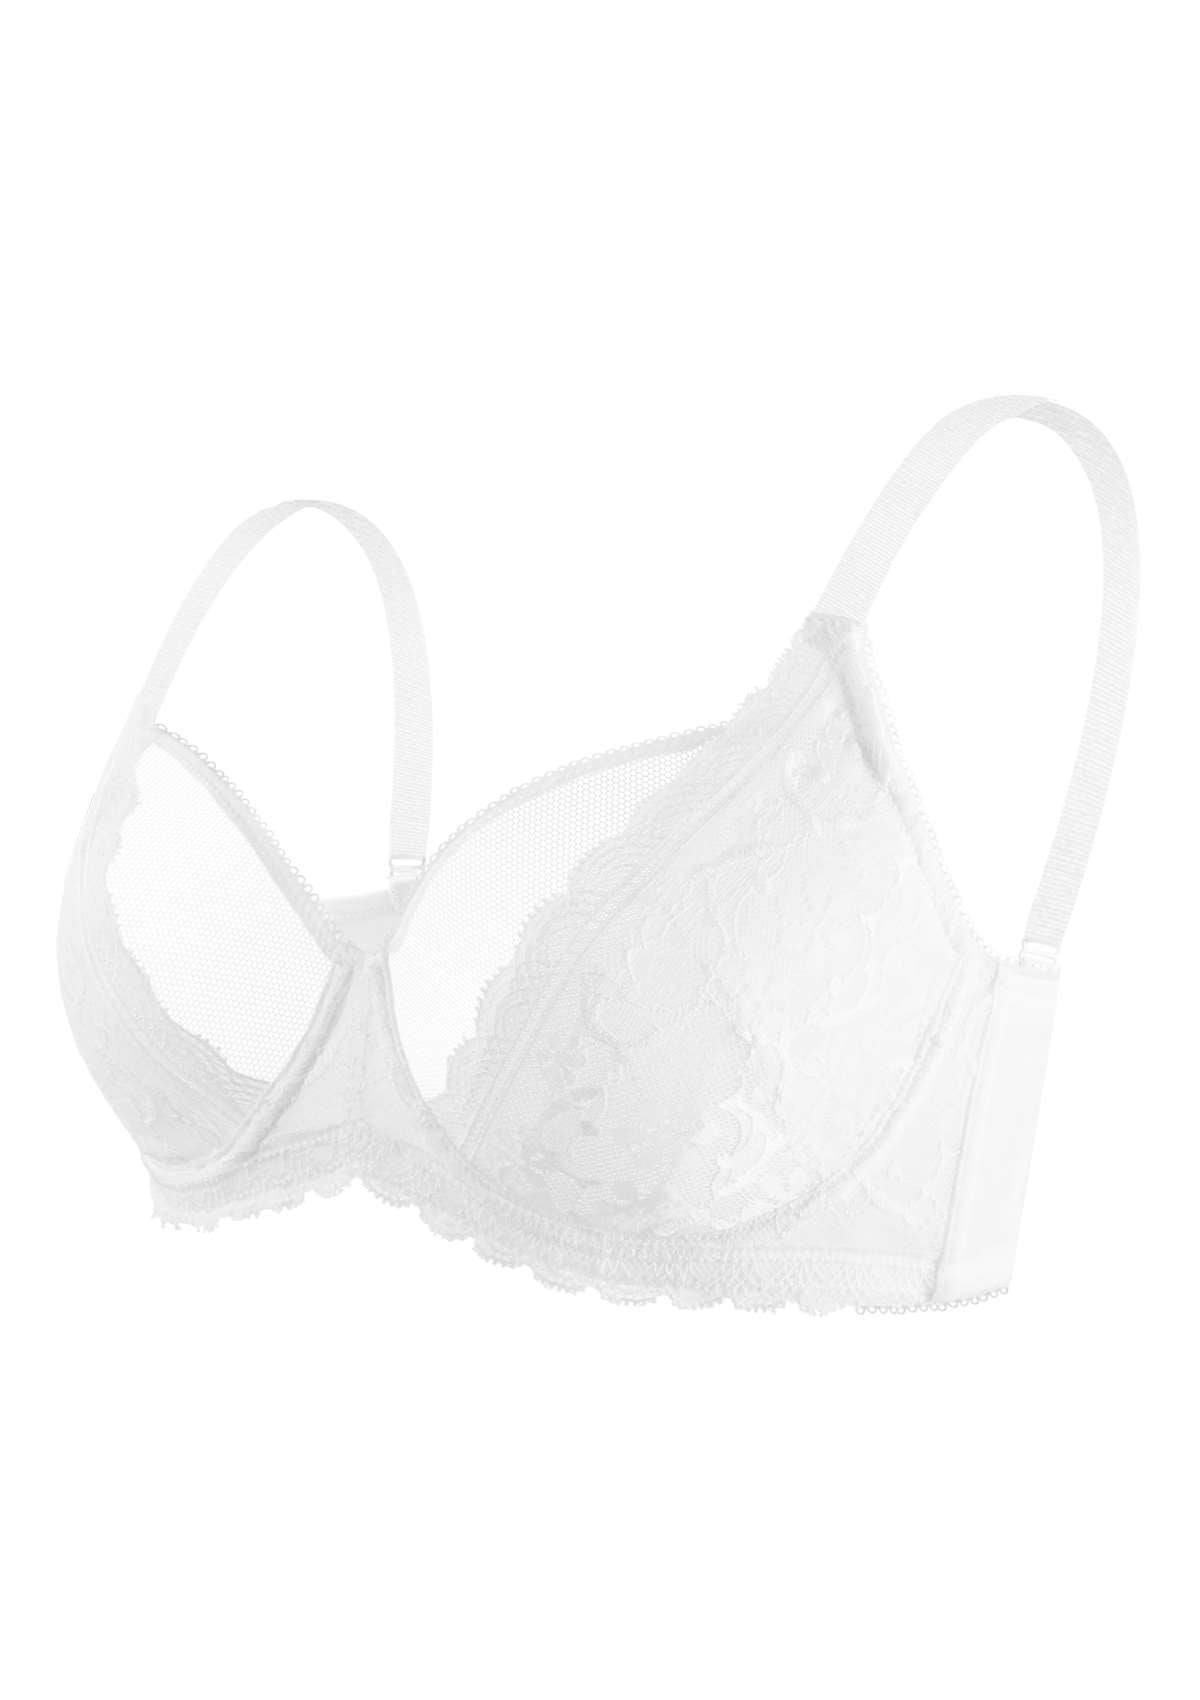 HSIA Anemone Big Bra: Best Bra For Lift And Support, Floral Bra - Burgundy / 36 / DD/E